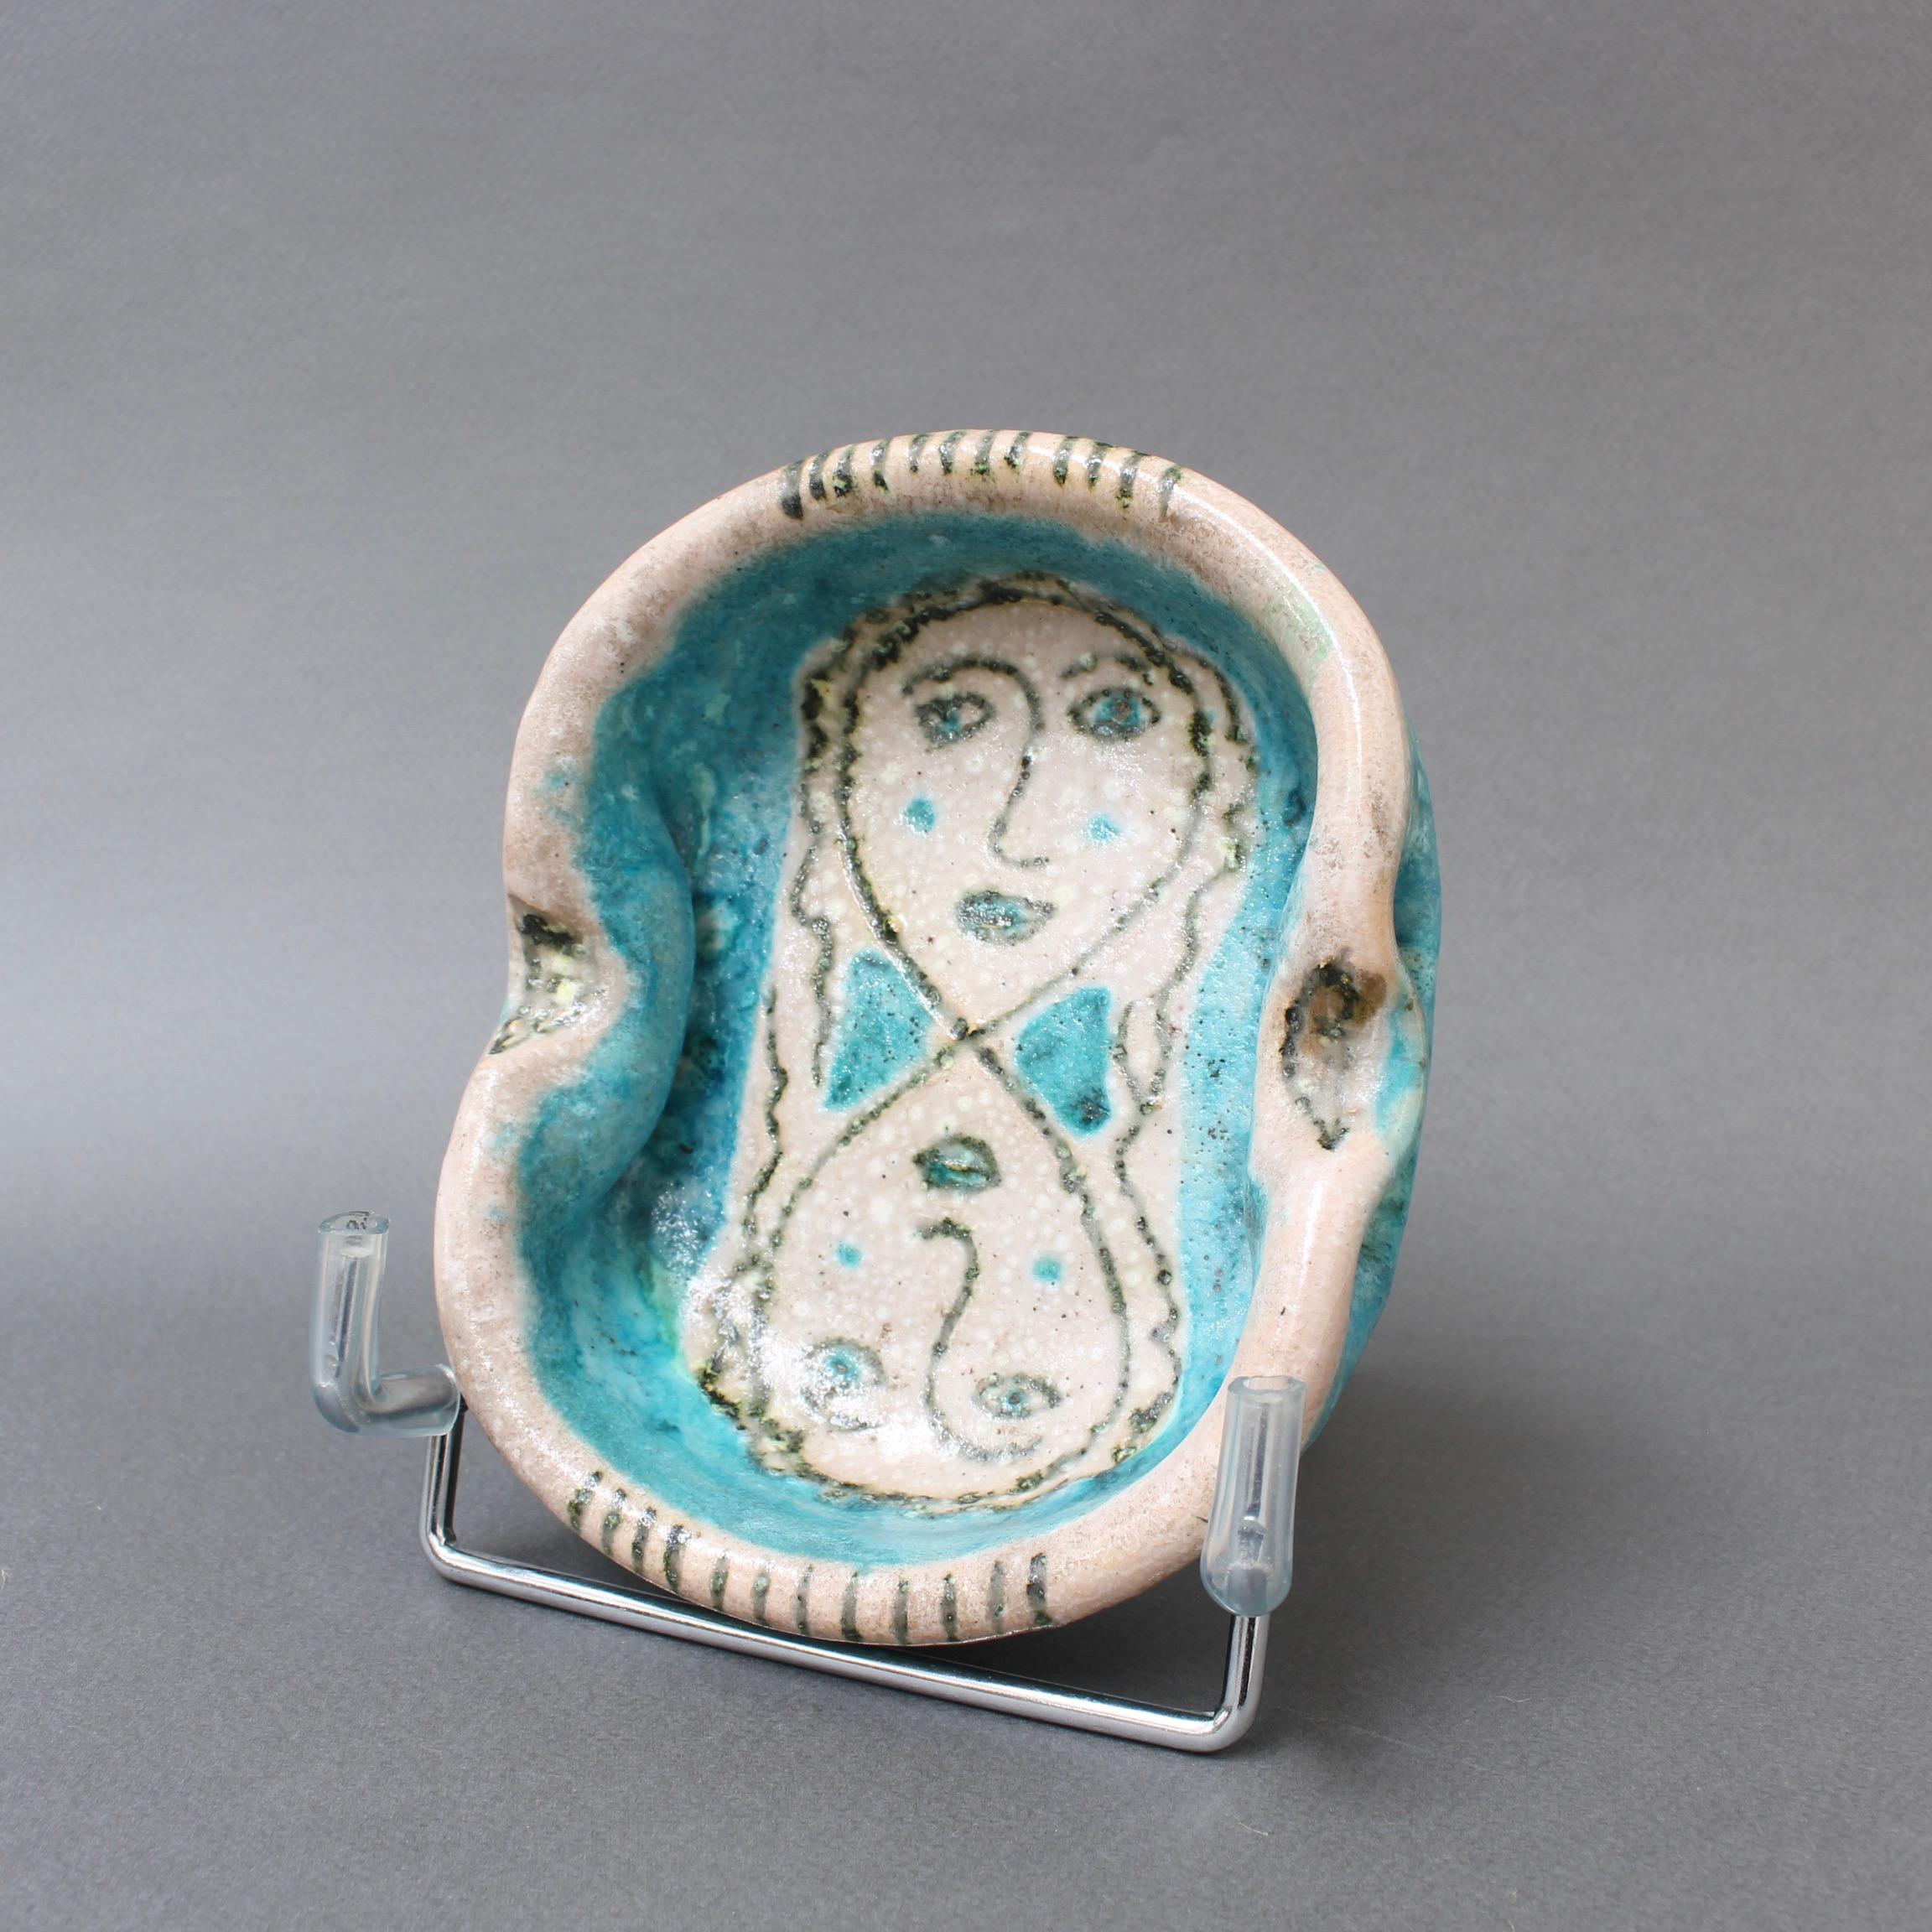 Decorative Italian blue ceramic bowl / ashtray / vide-poche by Guido Gambone, (circa 1950s). But who would flick their cigarette ashes in such a work of art? Pas moi! Decorated on the inside with stylized, opposing faces in thick, indigo blue and